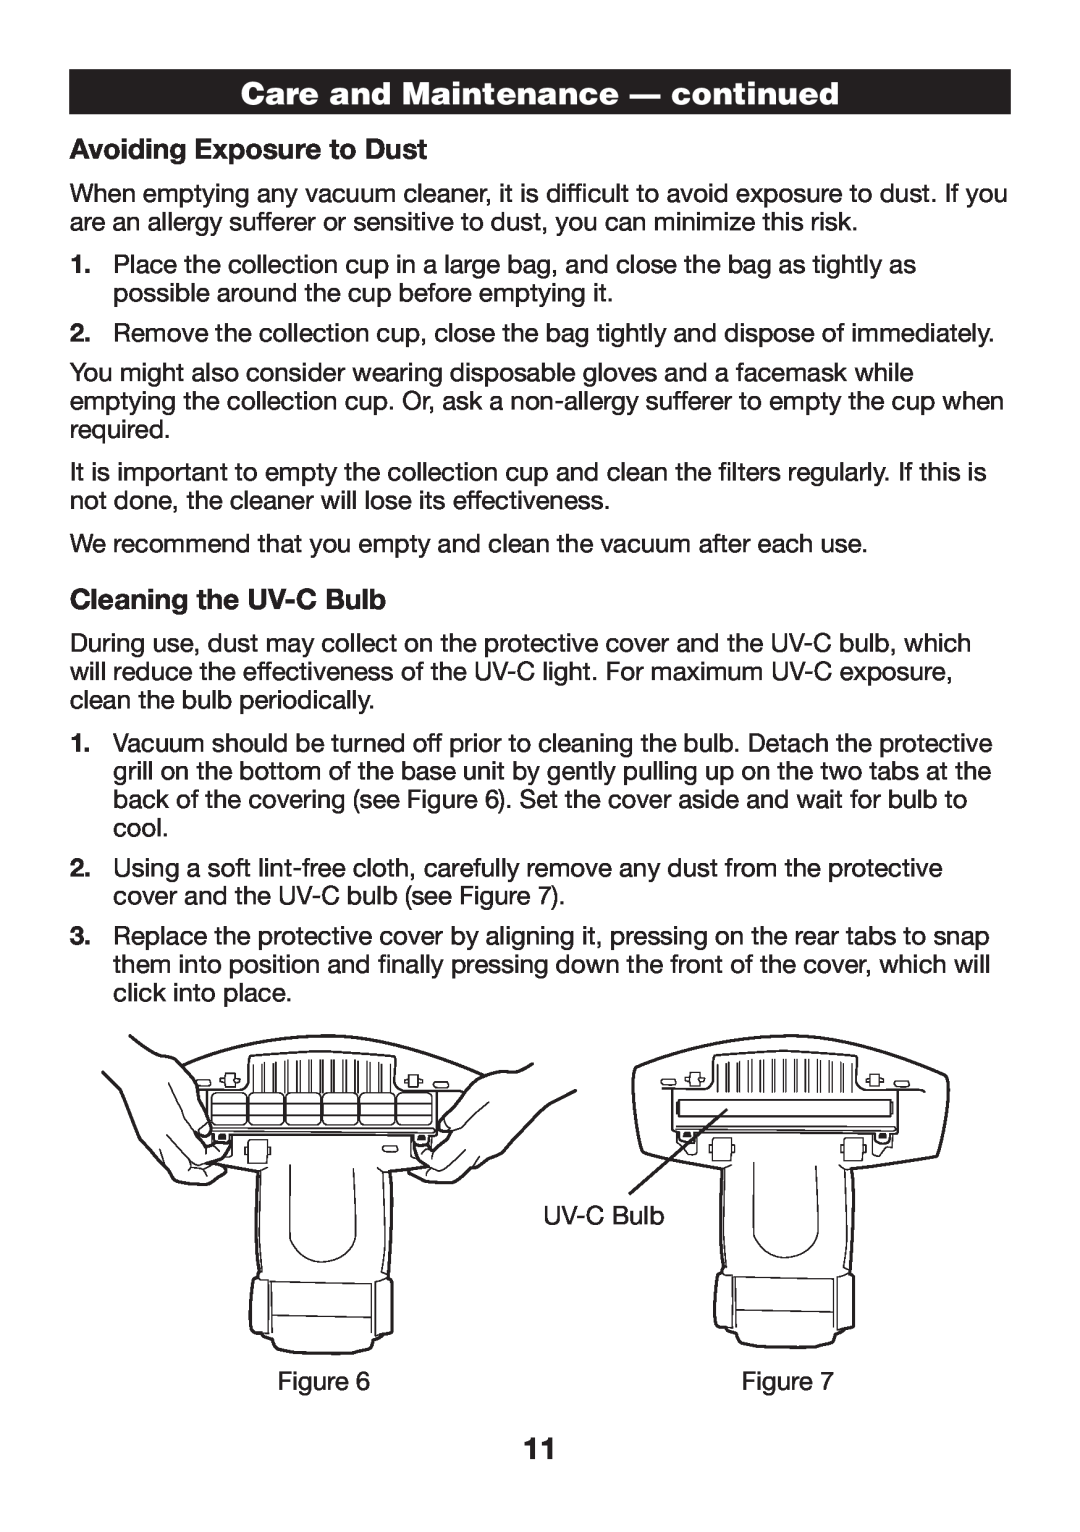 Verilux VH07 manual Care and Maintenance - continued, Avoiding Exposure to Dust, Cleaning the UV-CBulb 